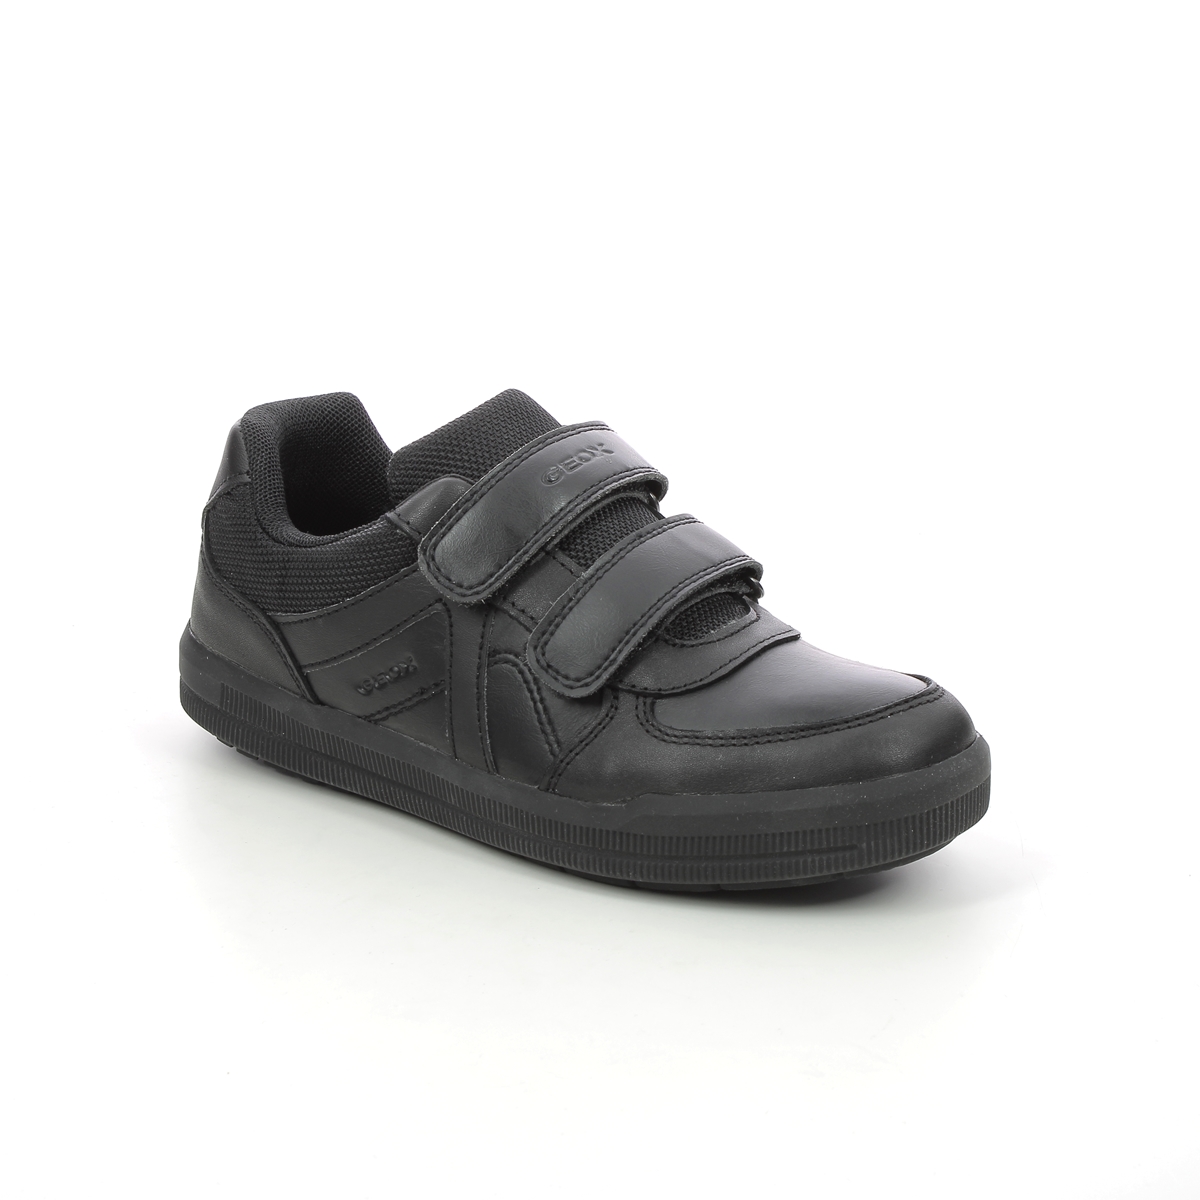 Geox - Arzach Boy Vel (Black Leather) J844Ae-C9999 In Size 30 In Plain Black Leather For School For kids